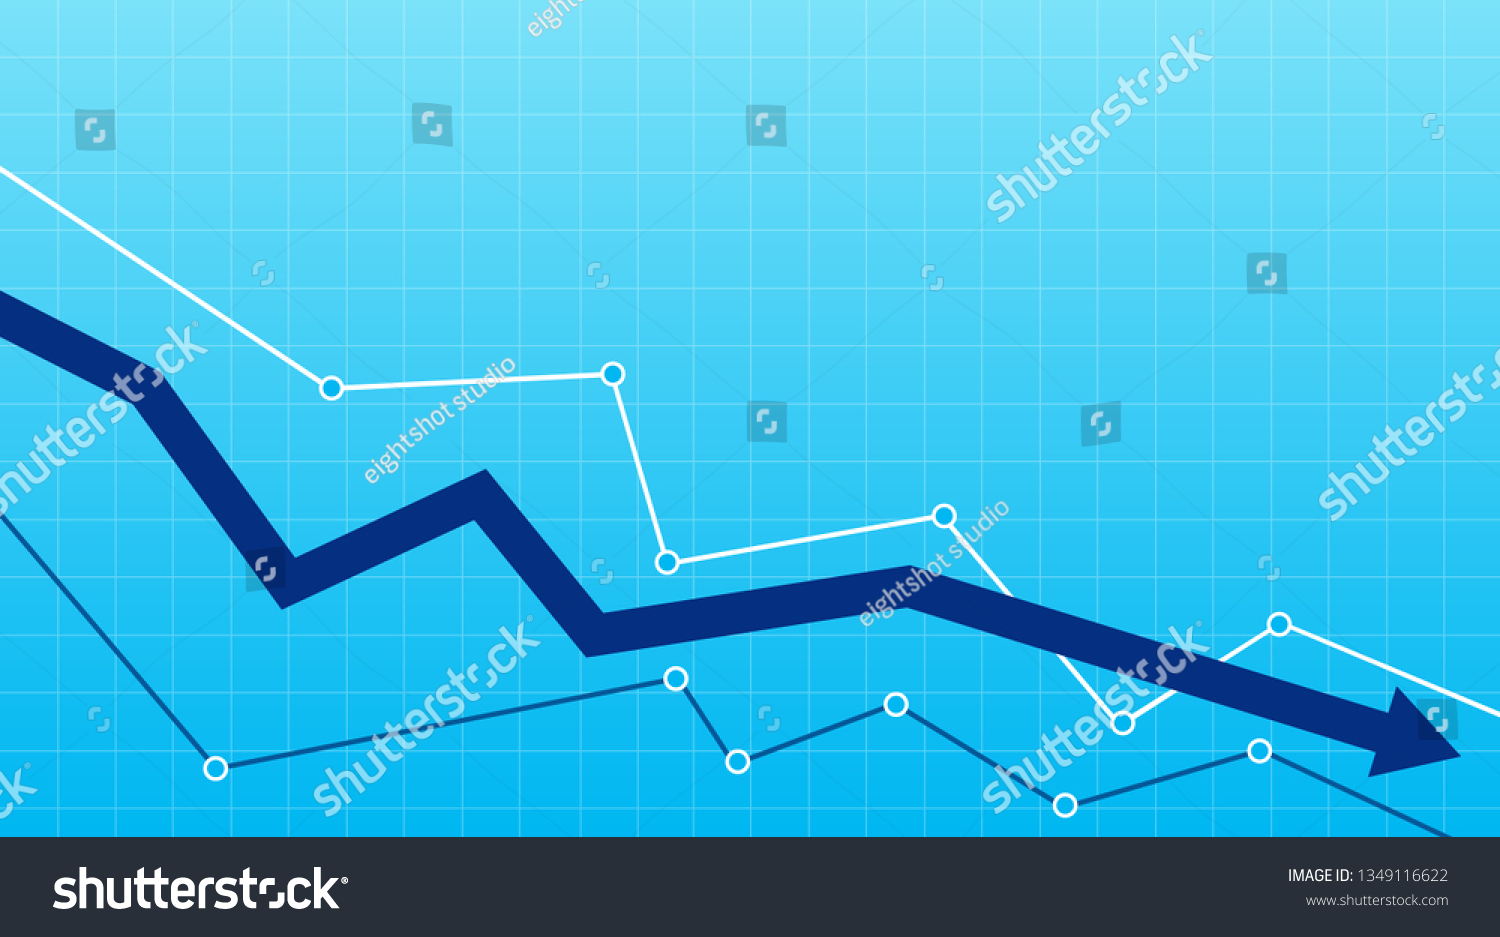 Stock or financial market crash with blue arrow on a blue background #1349116622